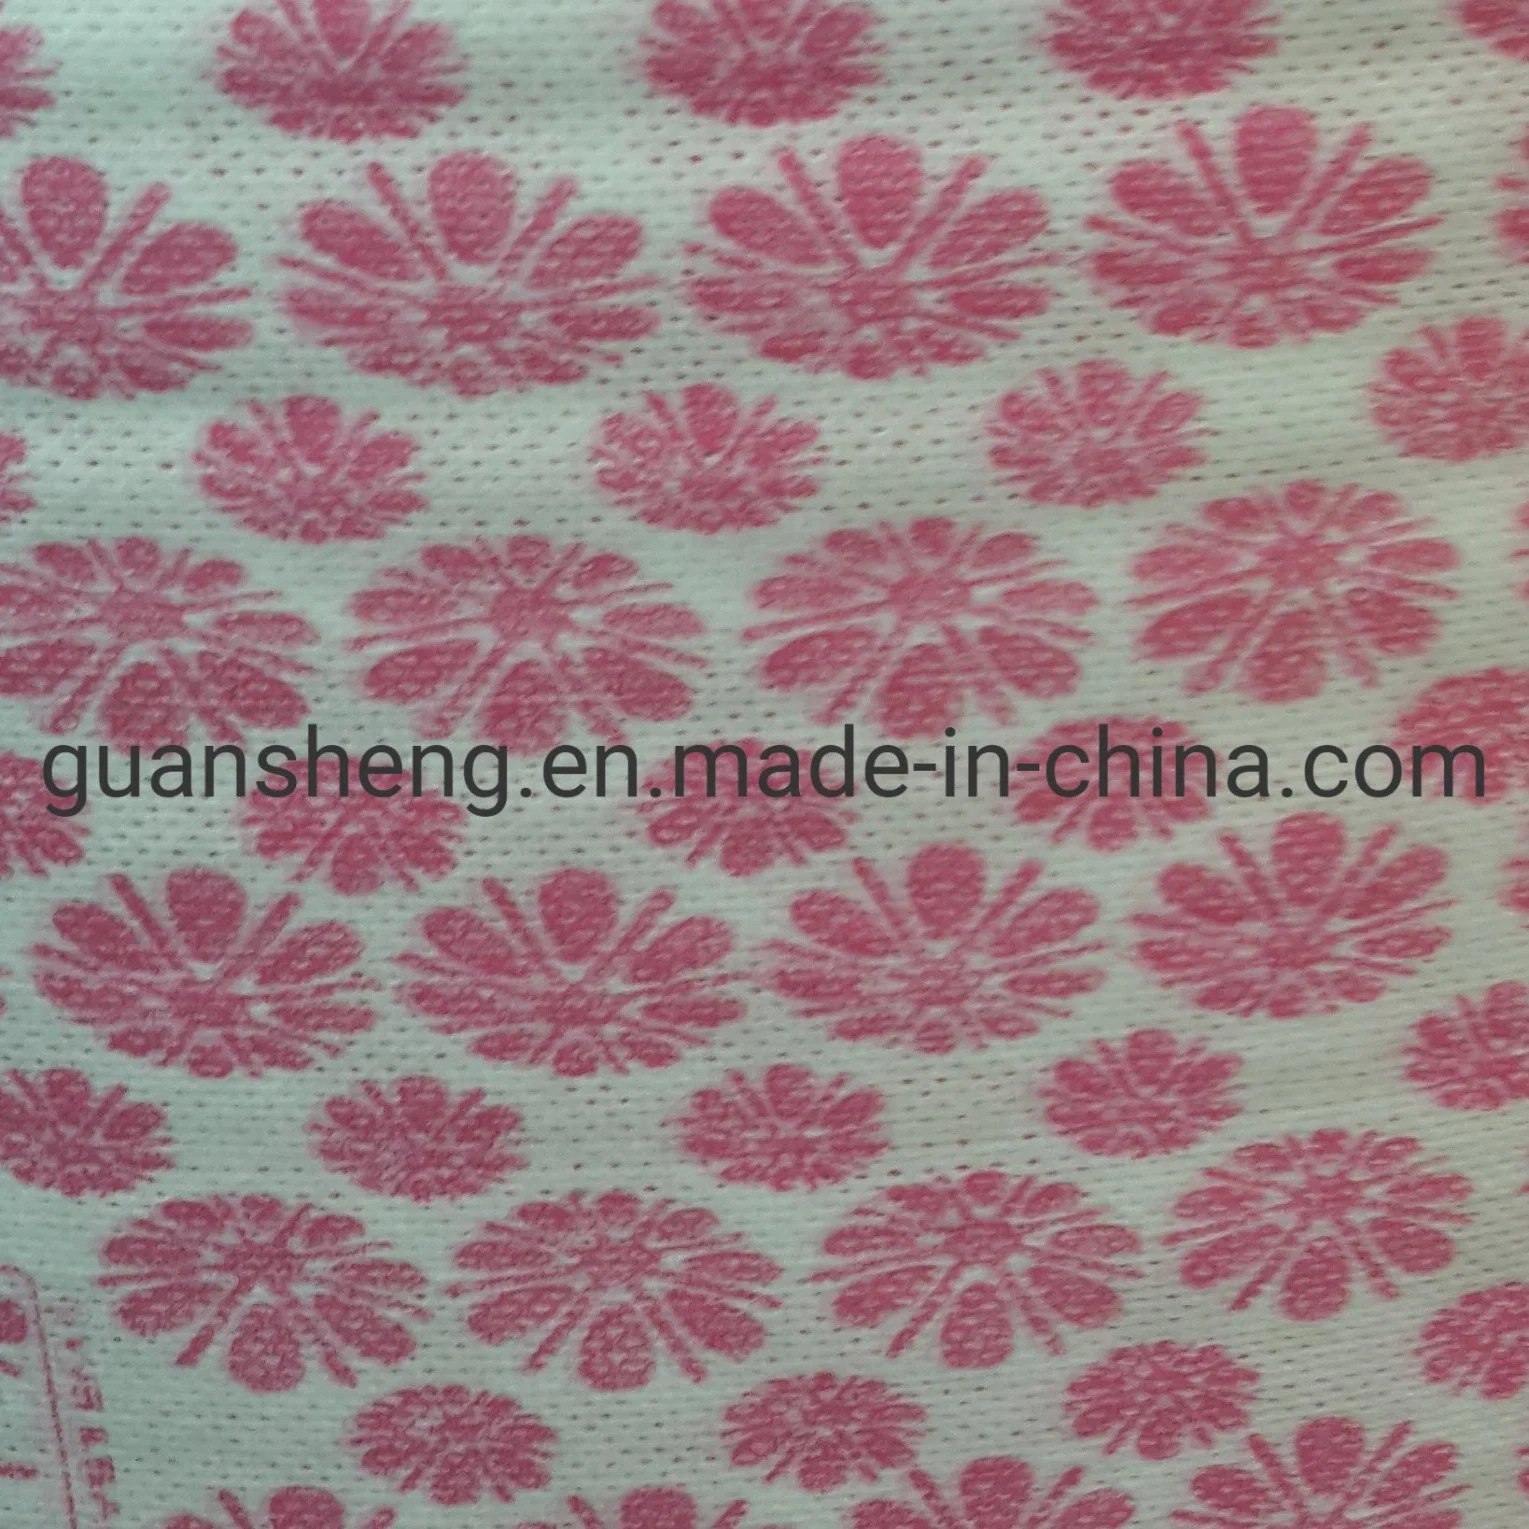 China Manufacture Viscose/Polyester/Cotton/Bamboo Customized Printing Wave Plain Spunlace Nonwoven Fabric for Wipes